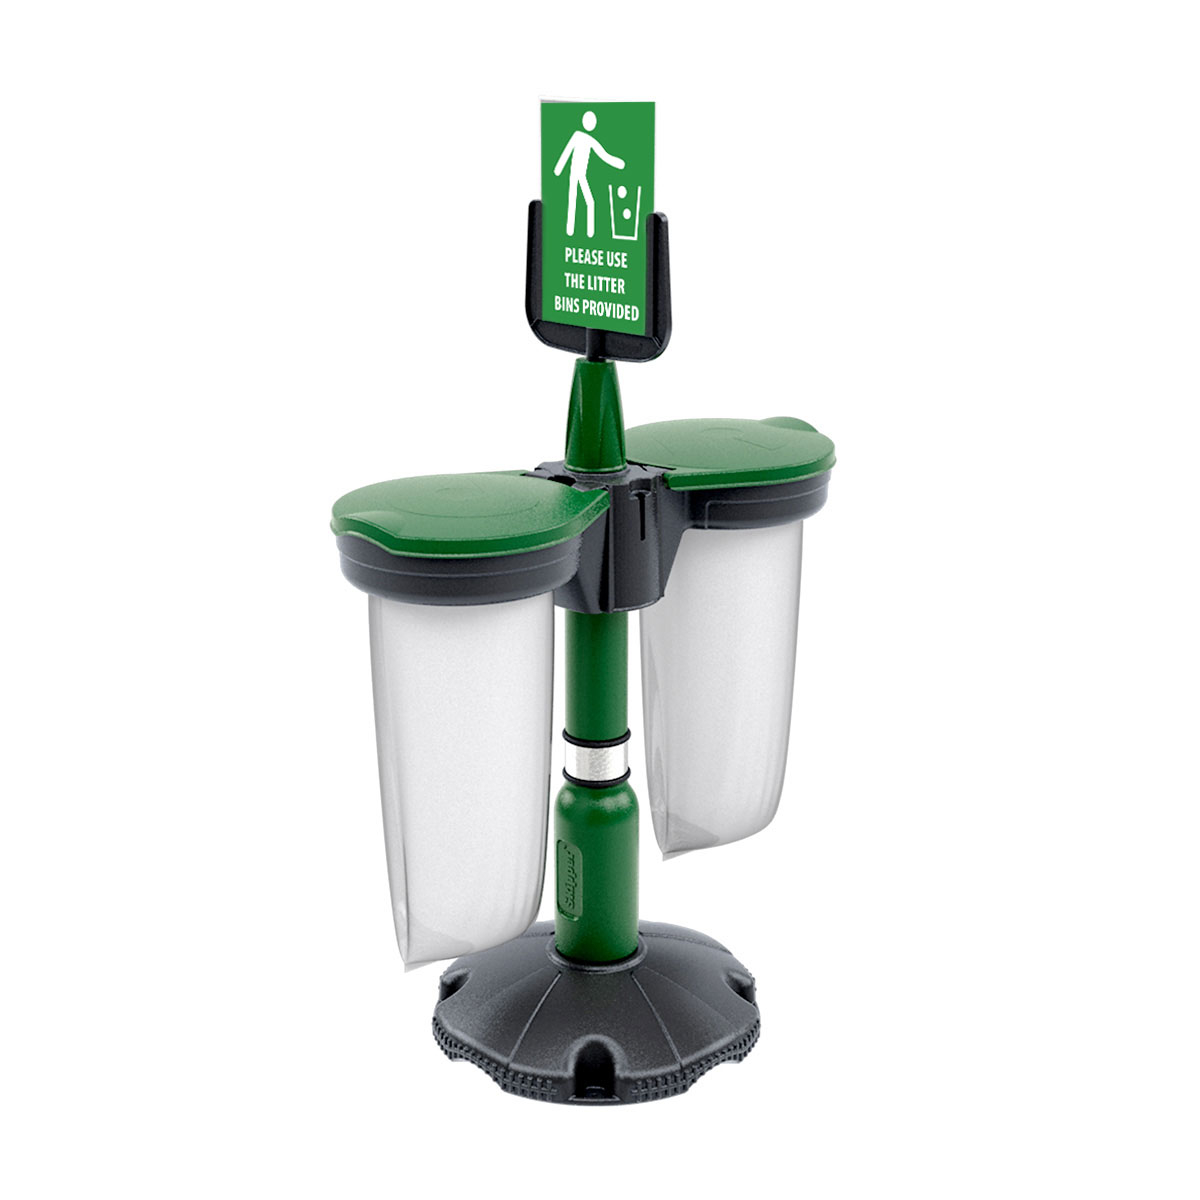 Skipper Safety Station in Green With Two Recycling Bins And A4 Sign Holder